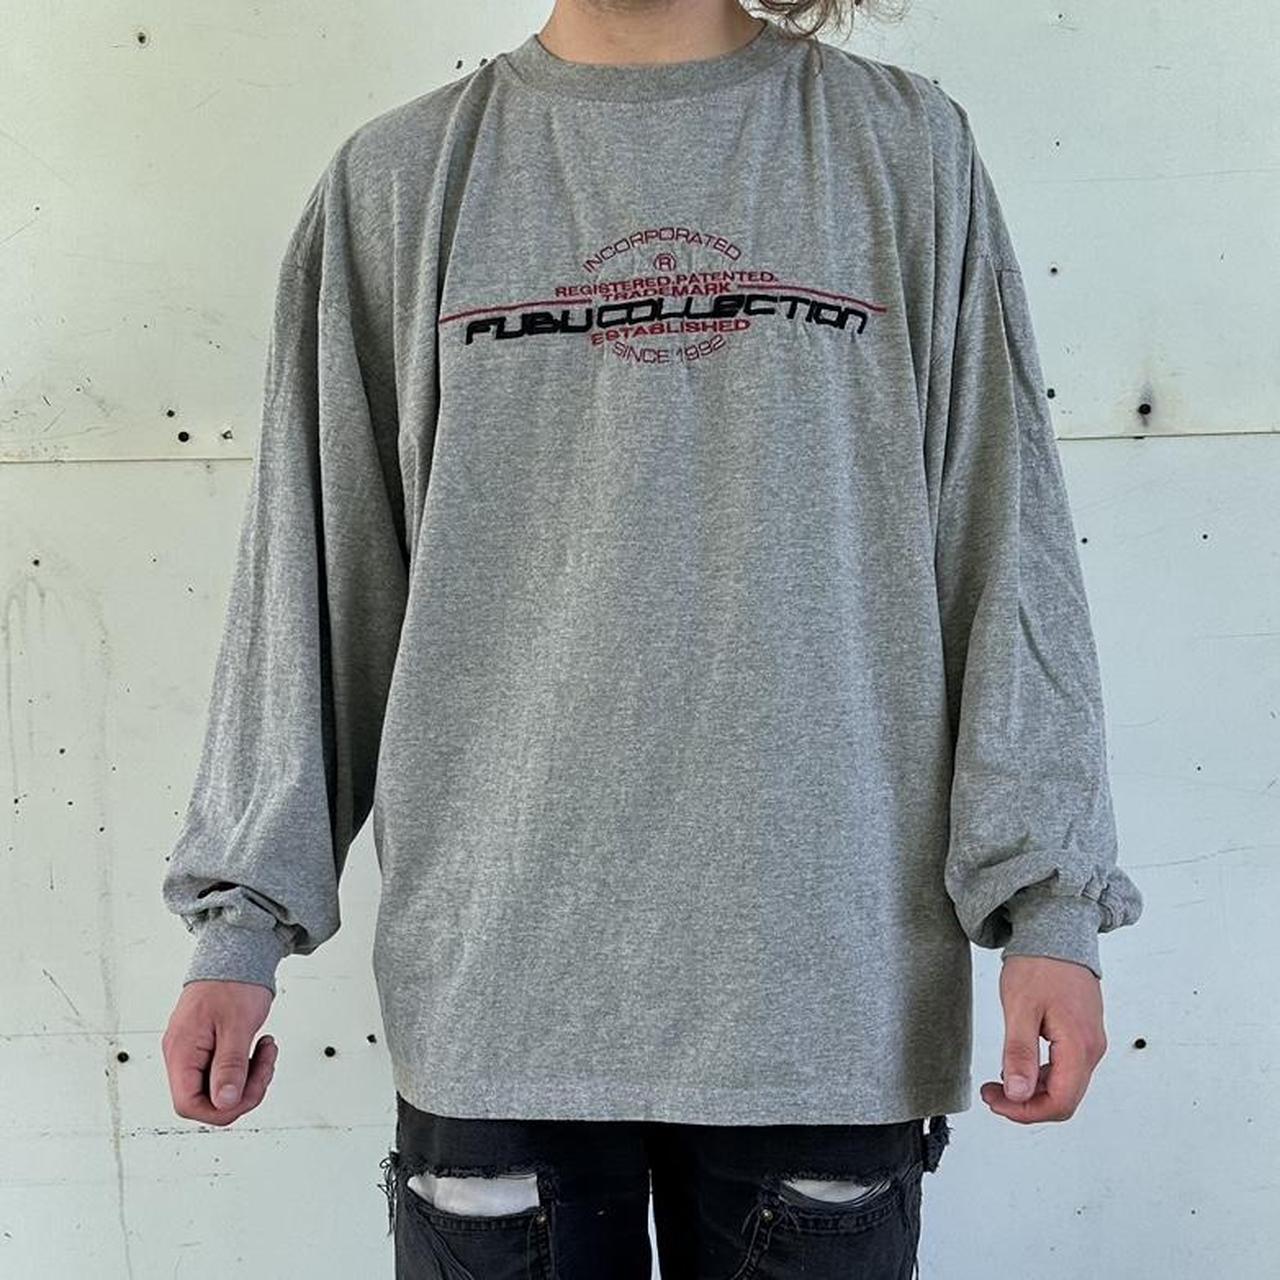 item listed by groundzerosupply